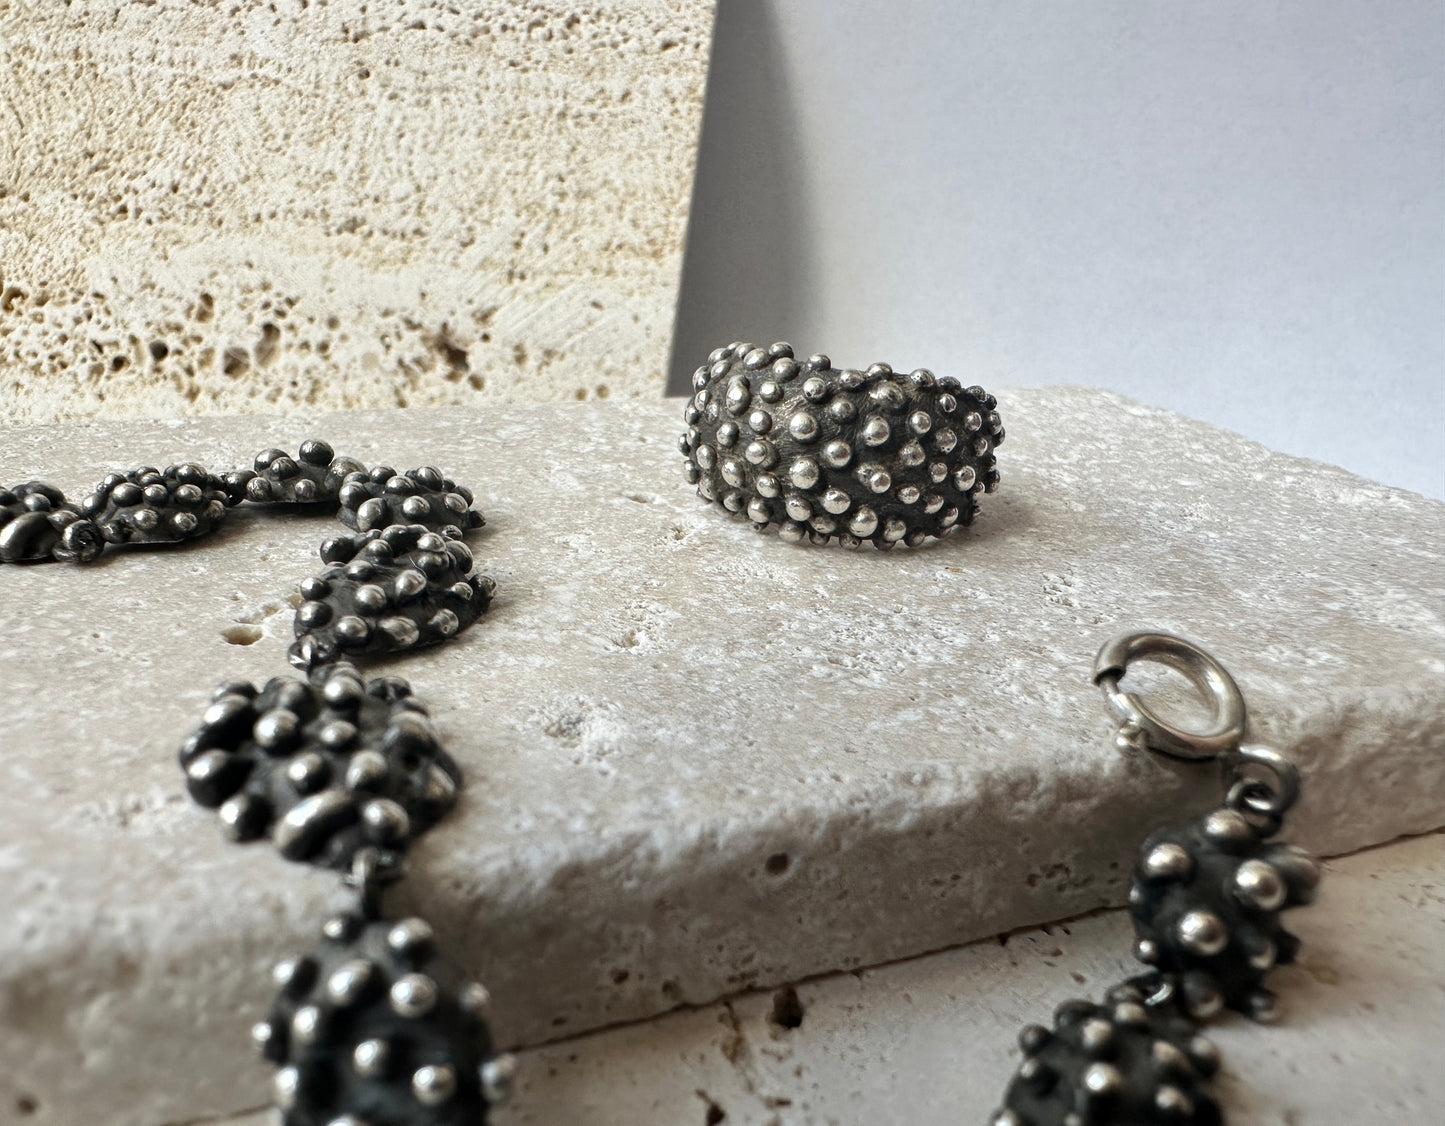 Oxidized Silver Speckle Ring